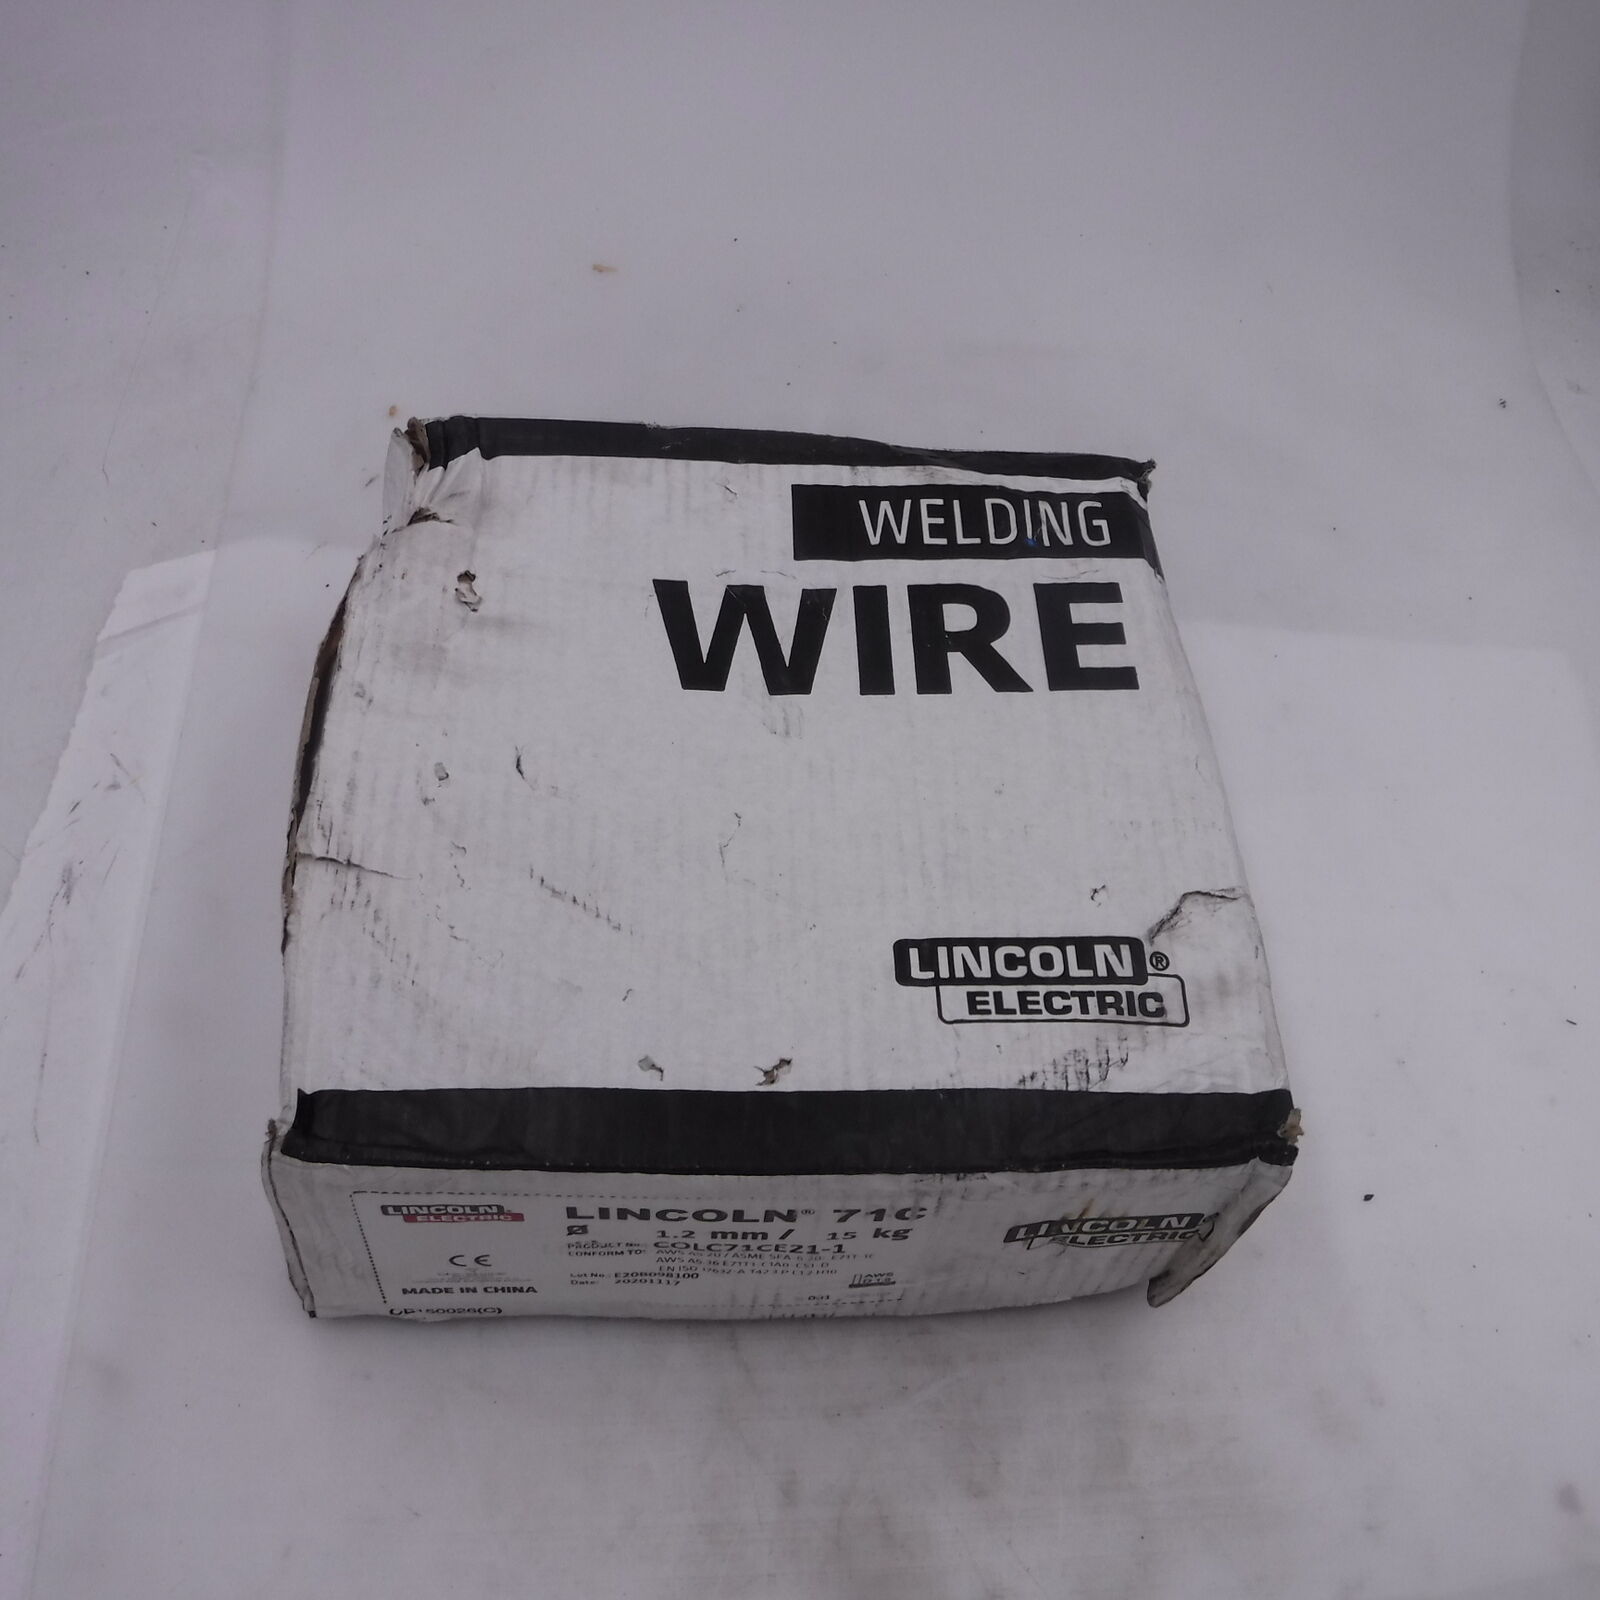 15kg (33 lbs) of Lincoln 71C CCOLC71CE21-1 Welding Wire 1.2mm .047\